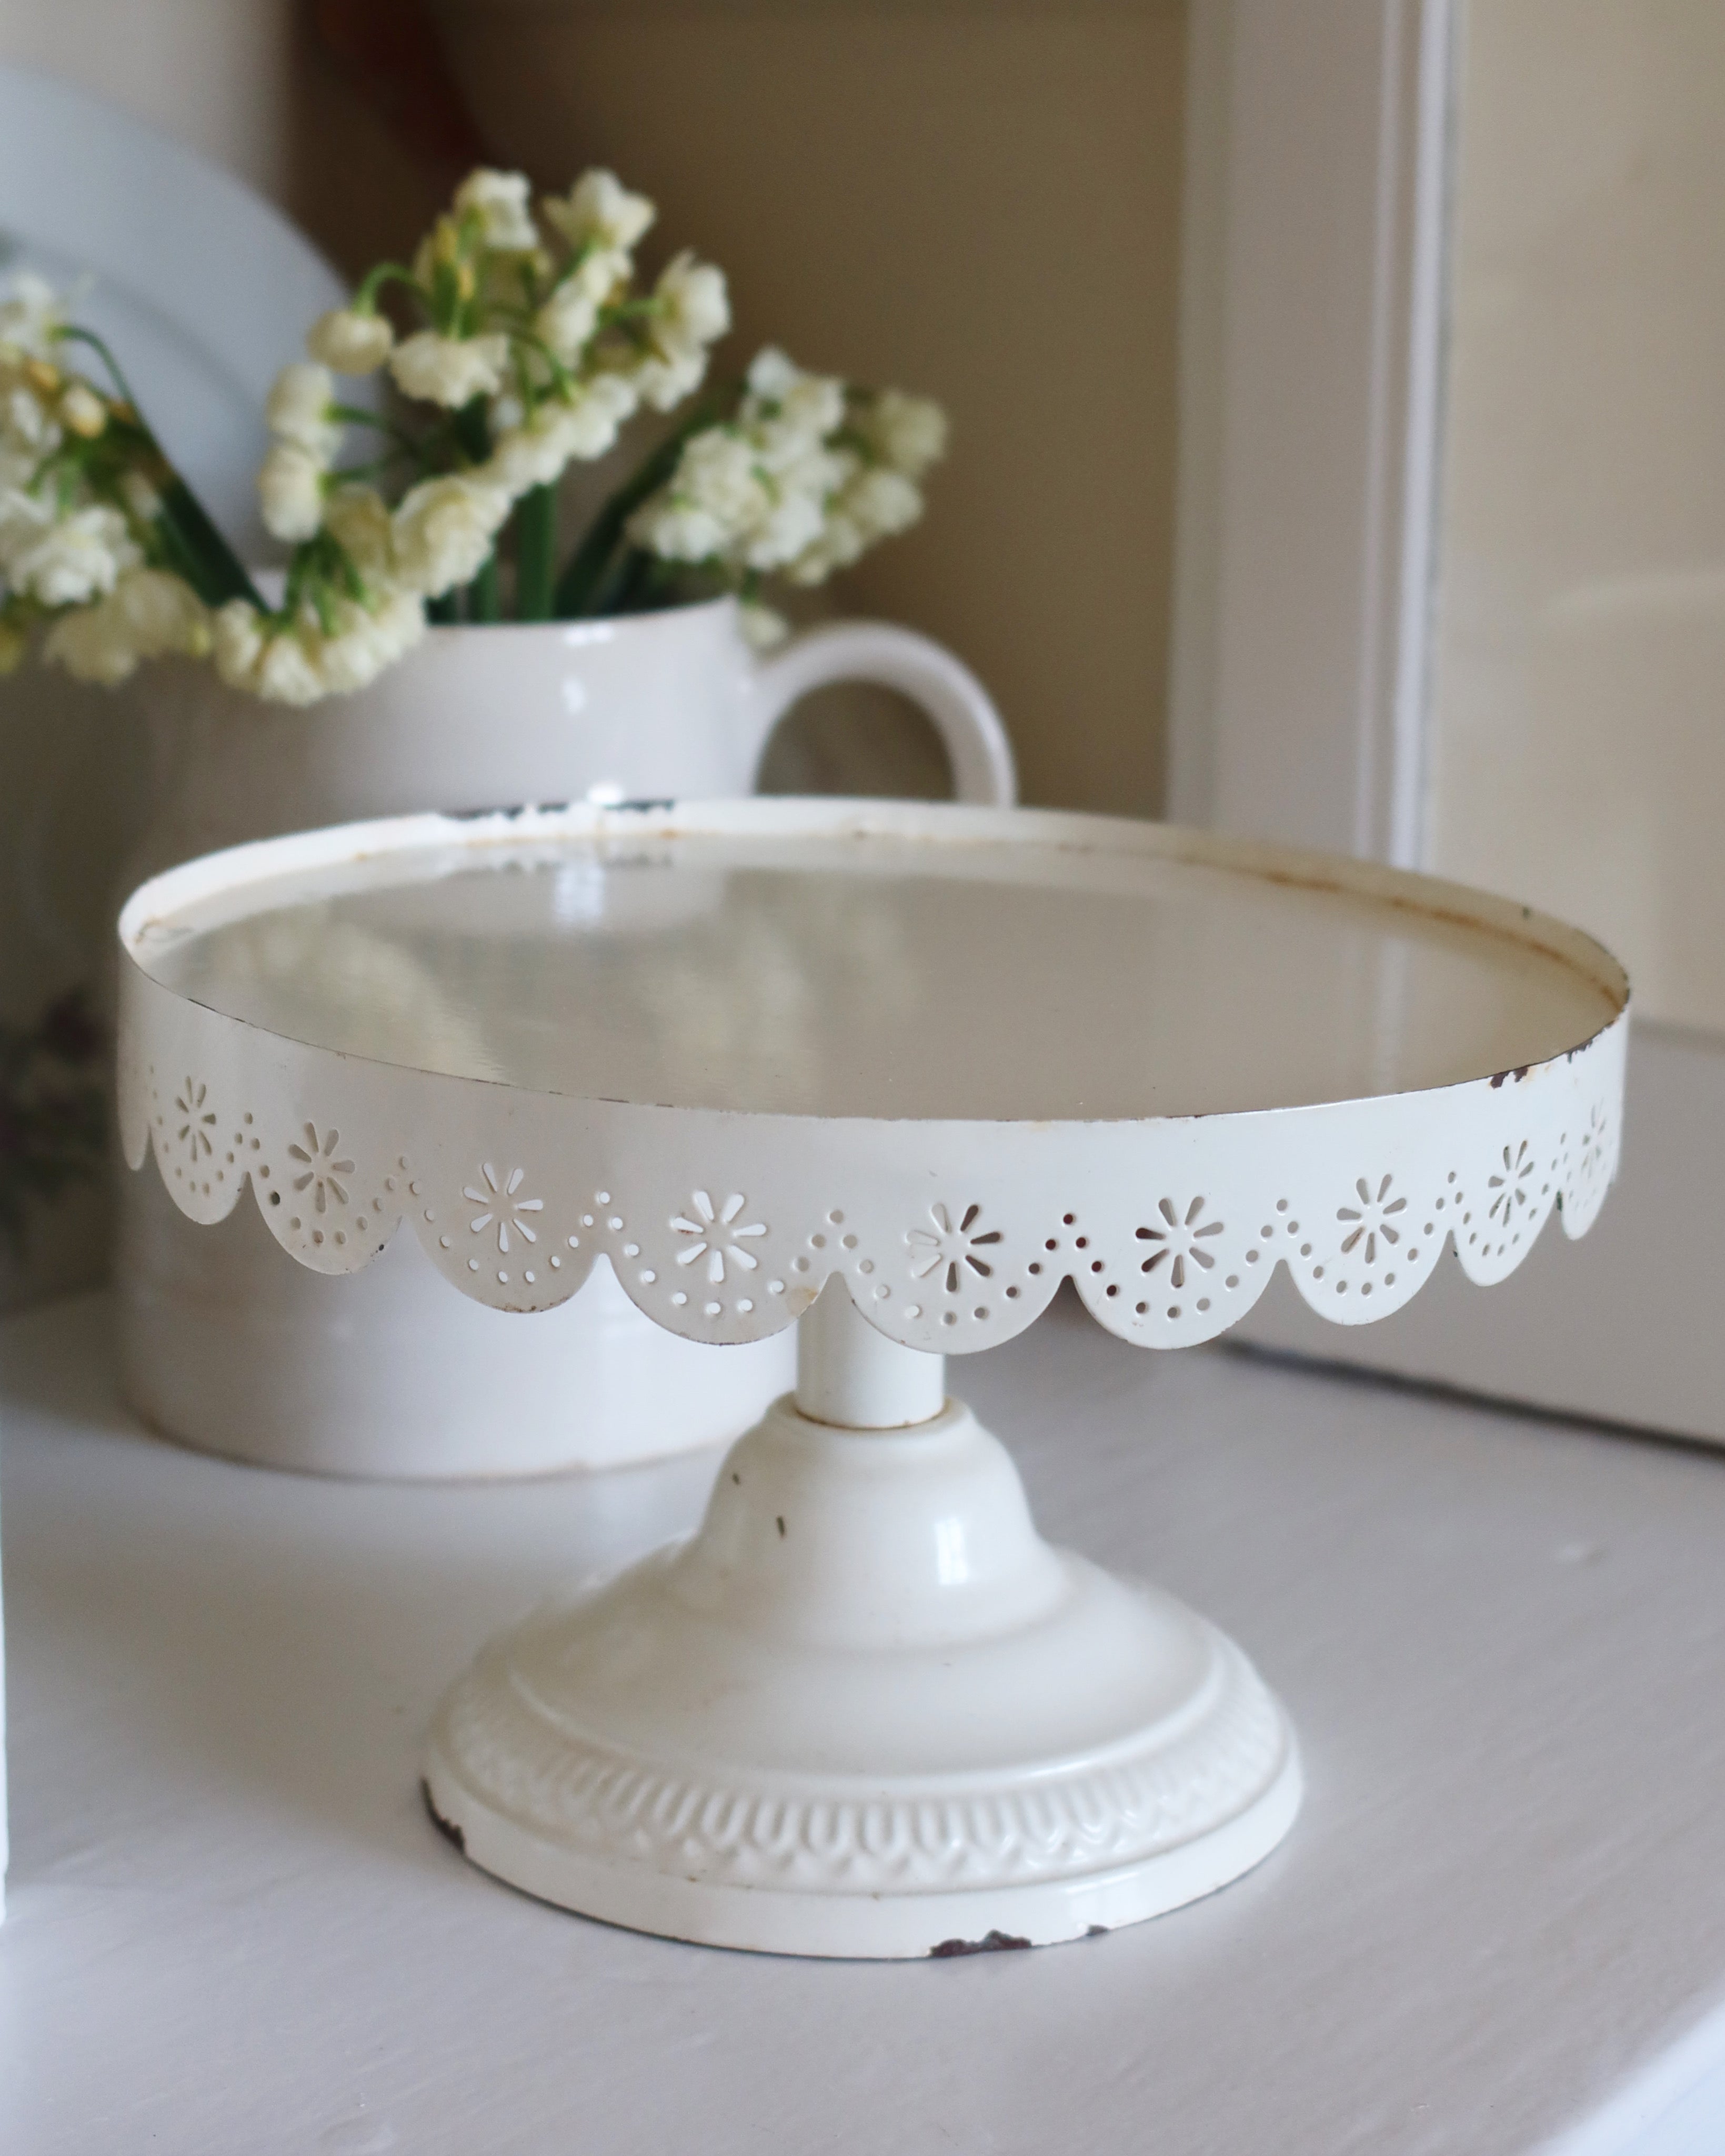 Antique Cake Stand - Etsy